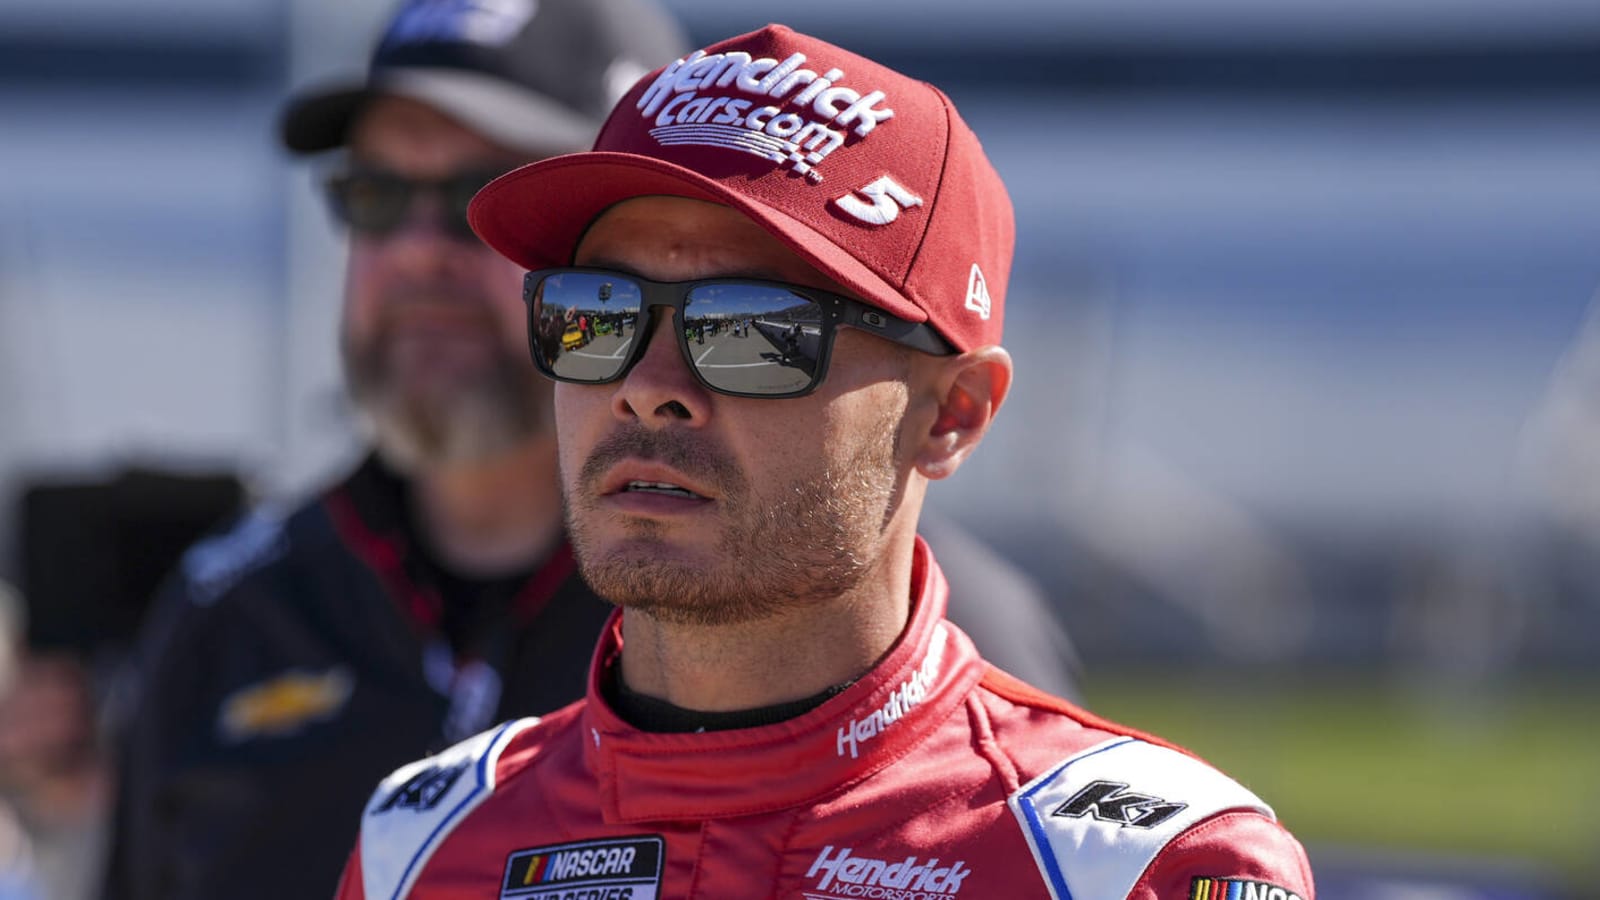 Larson not allowed to qualify, McDowell wins pole for GEICO 500